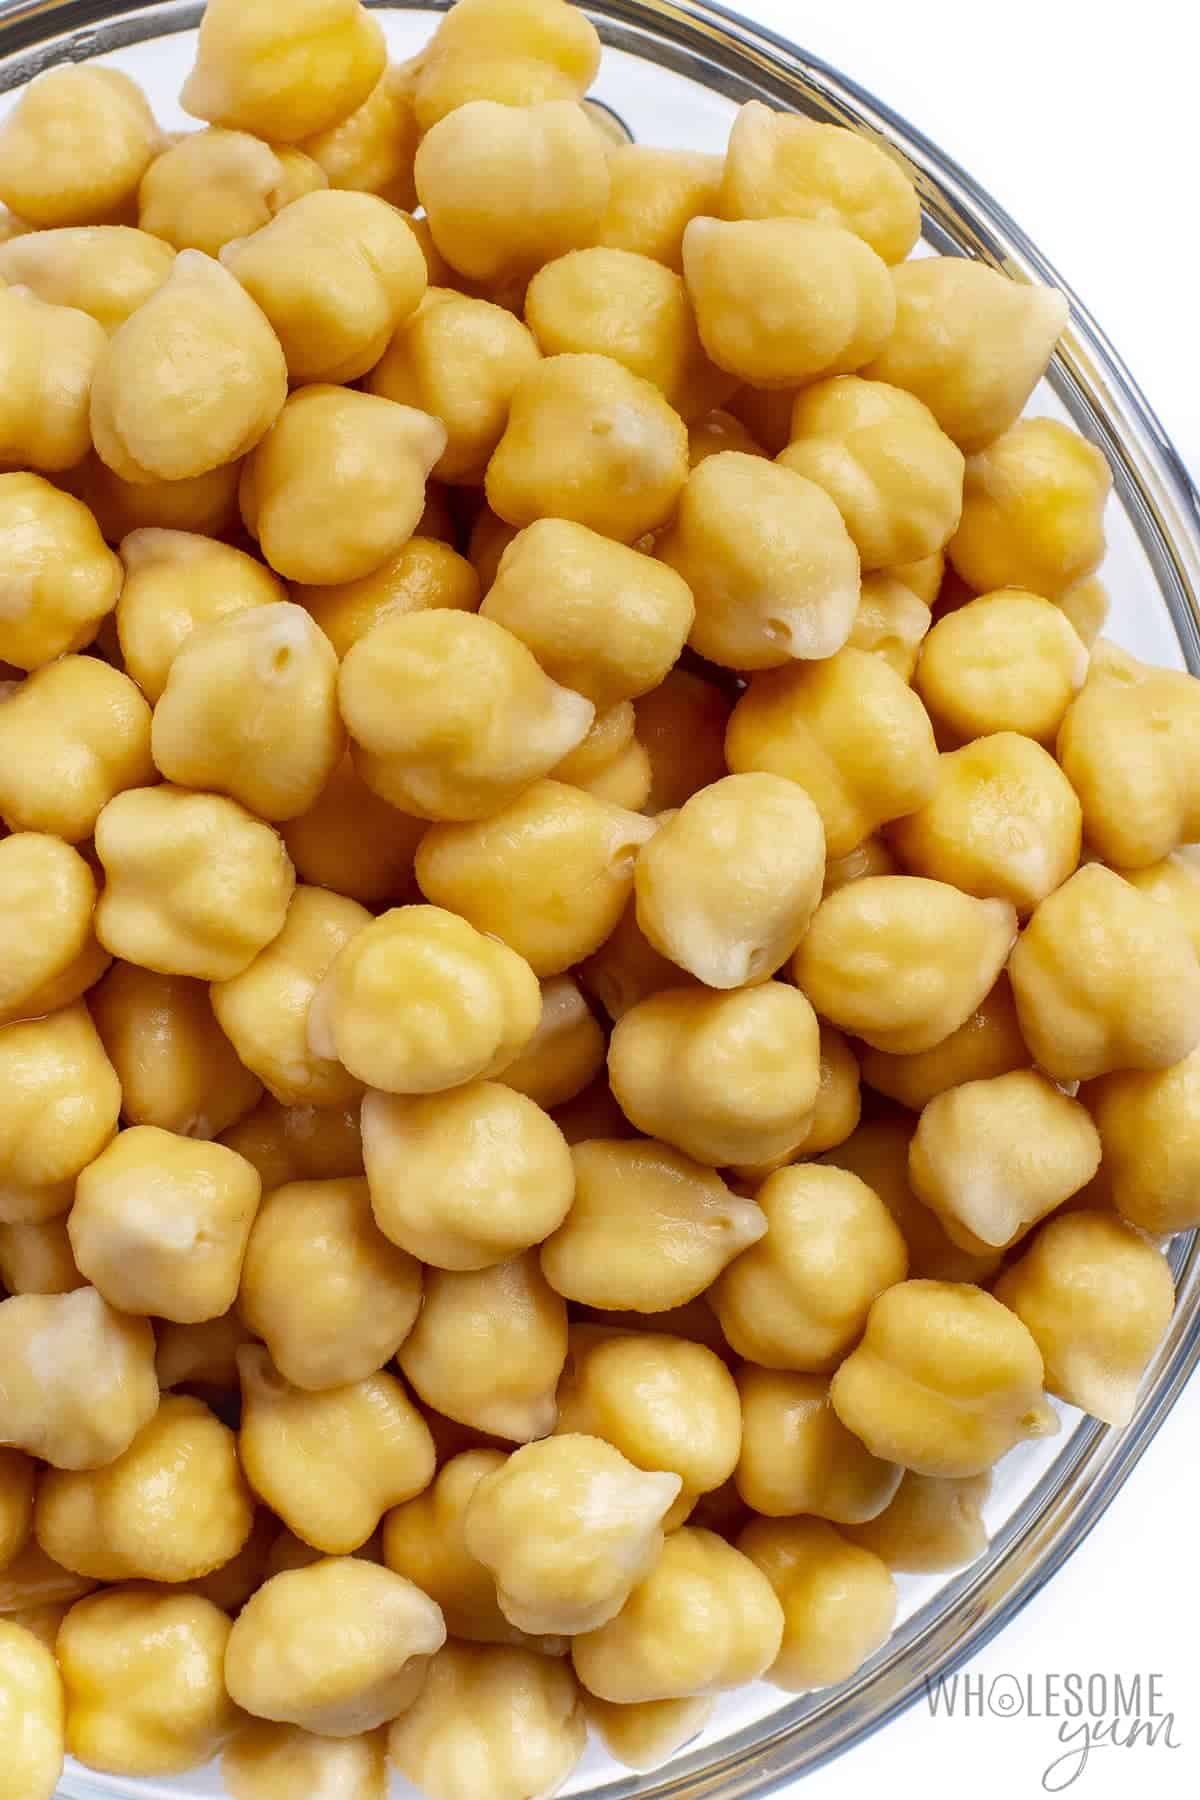 Are chickpeas keto? These chickpeas in a bowl are not very keto friendly.